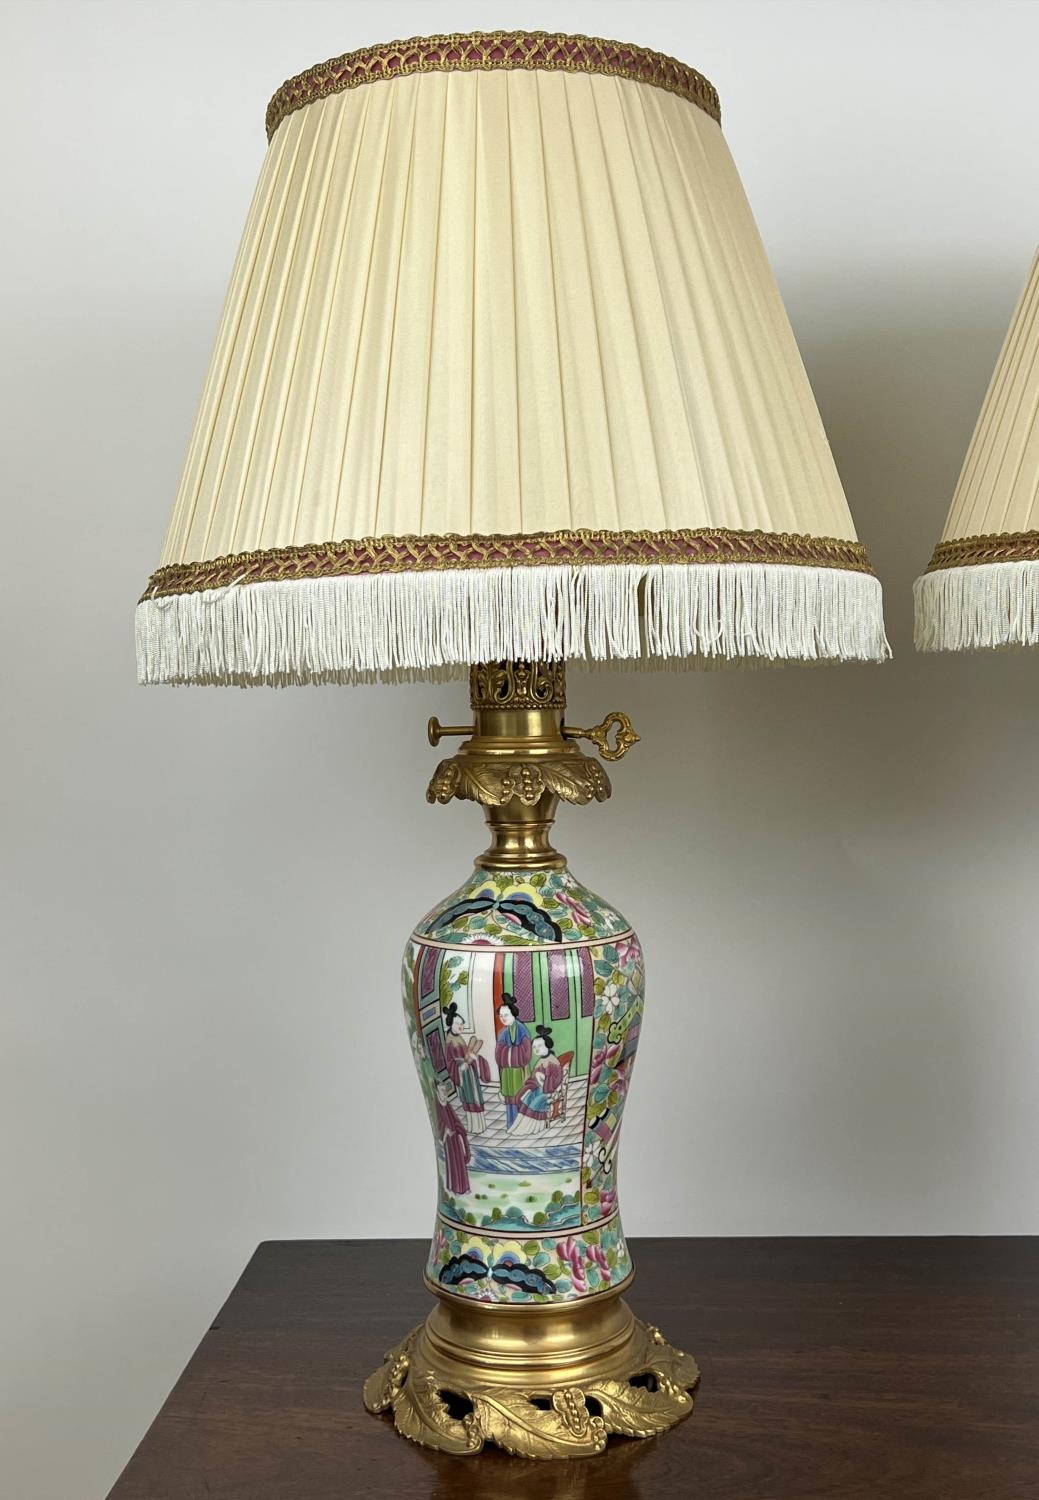 TABLE LAMPS, a pair, Cantonese hand-painted porcelain baluster form with fine ormolu mounts and silk - Image 7 of 7